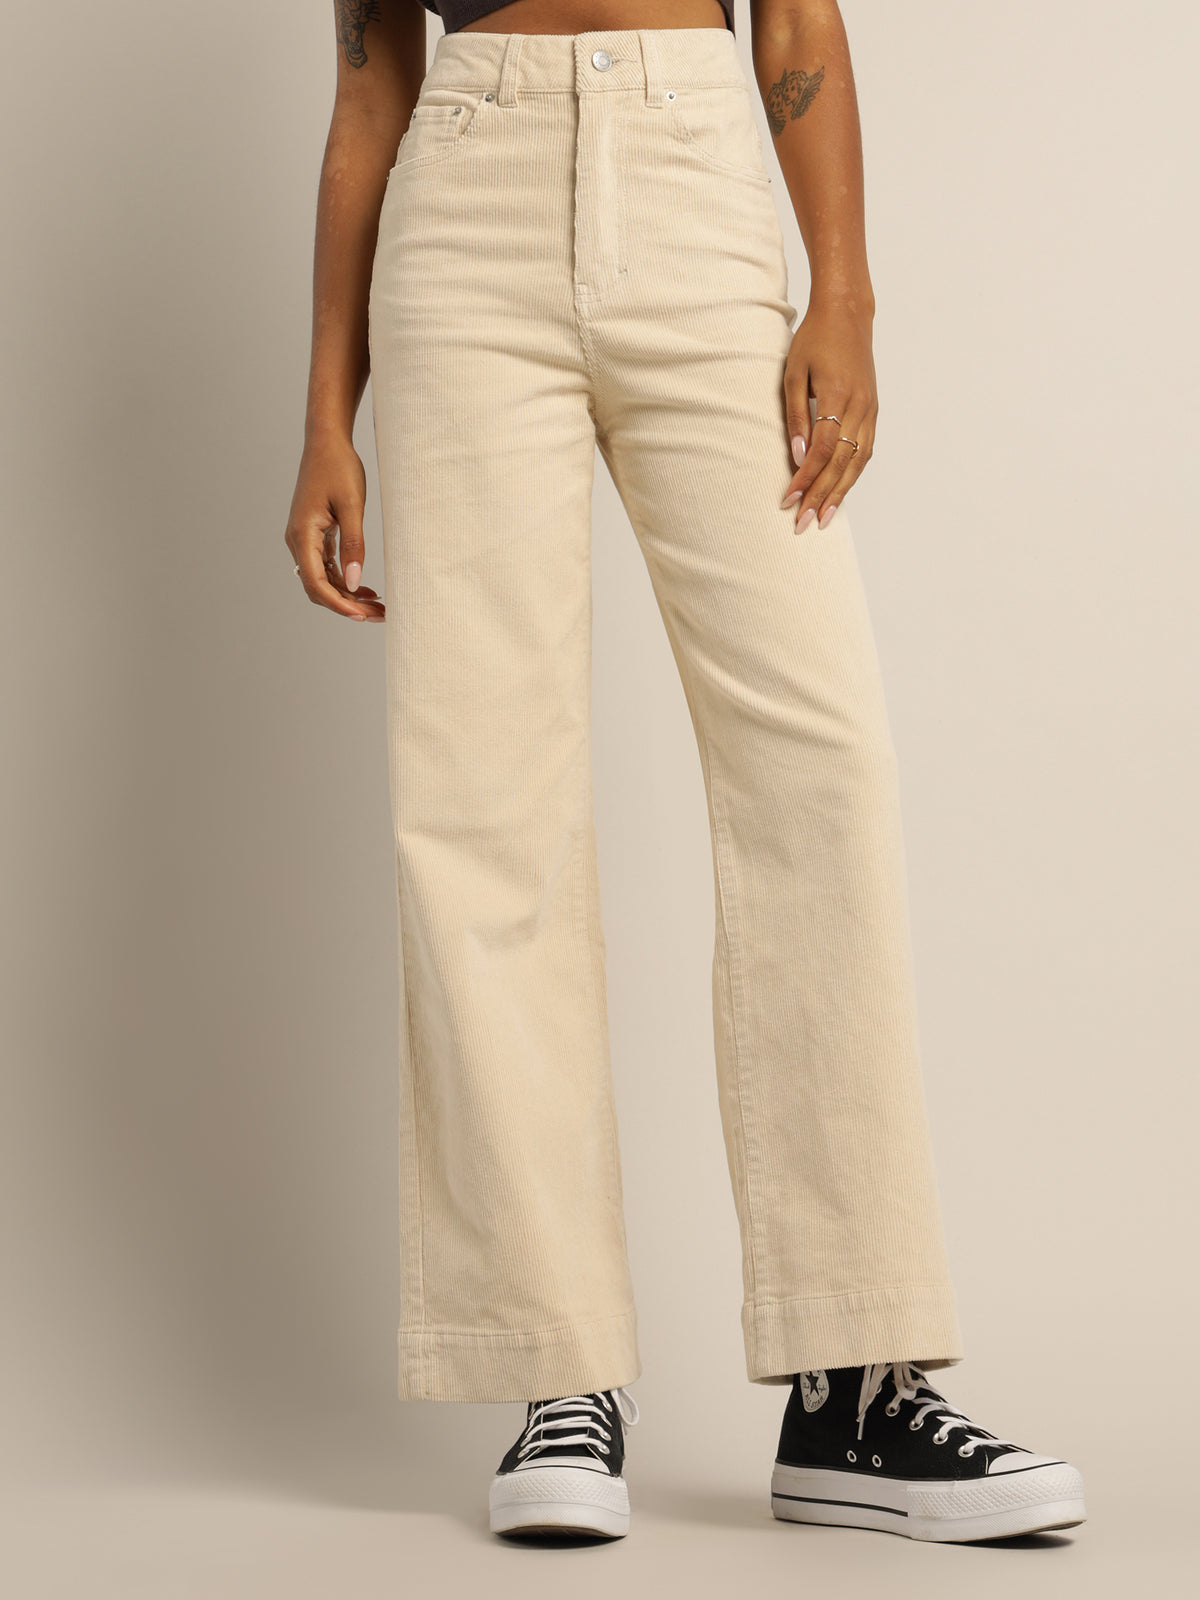 Dahlia Cord Jeans in Off White